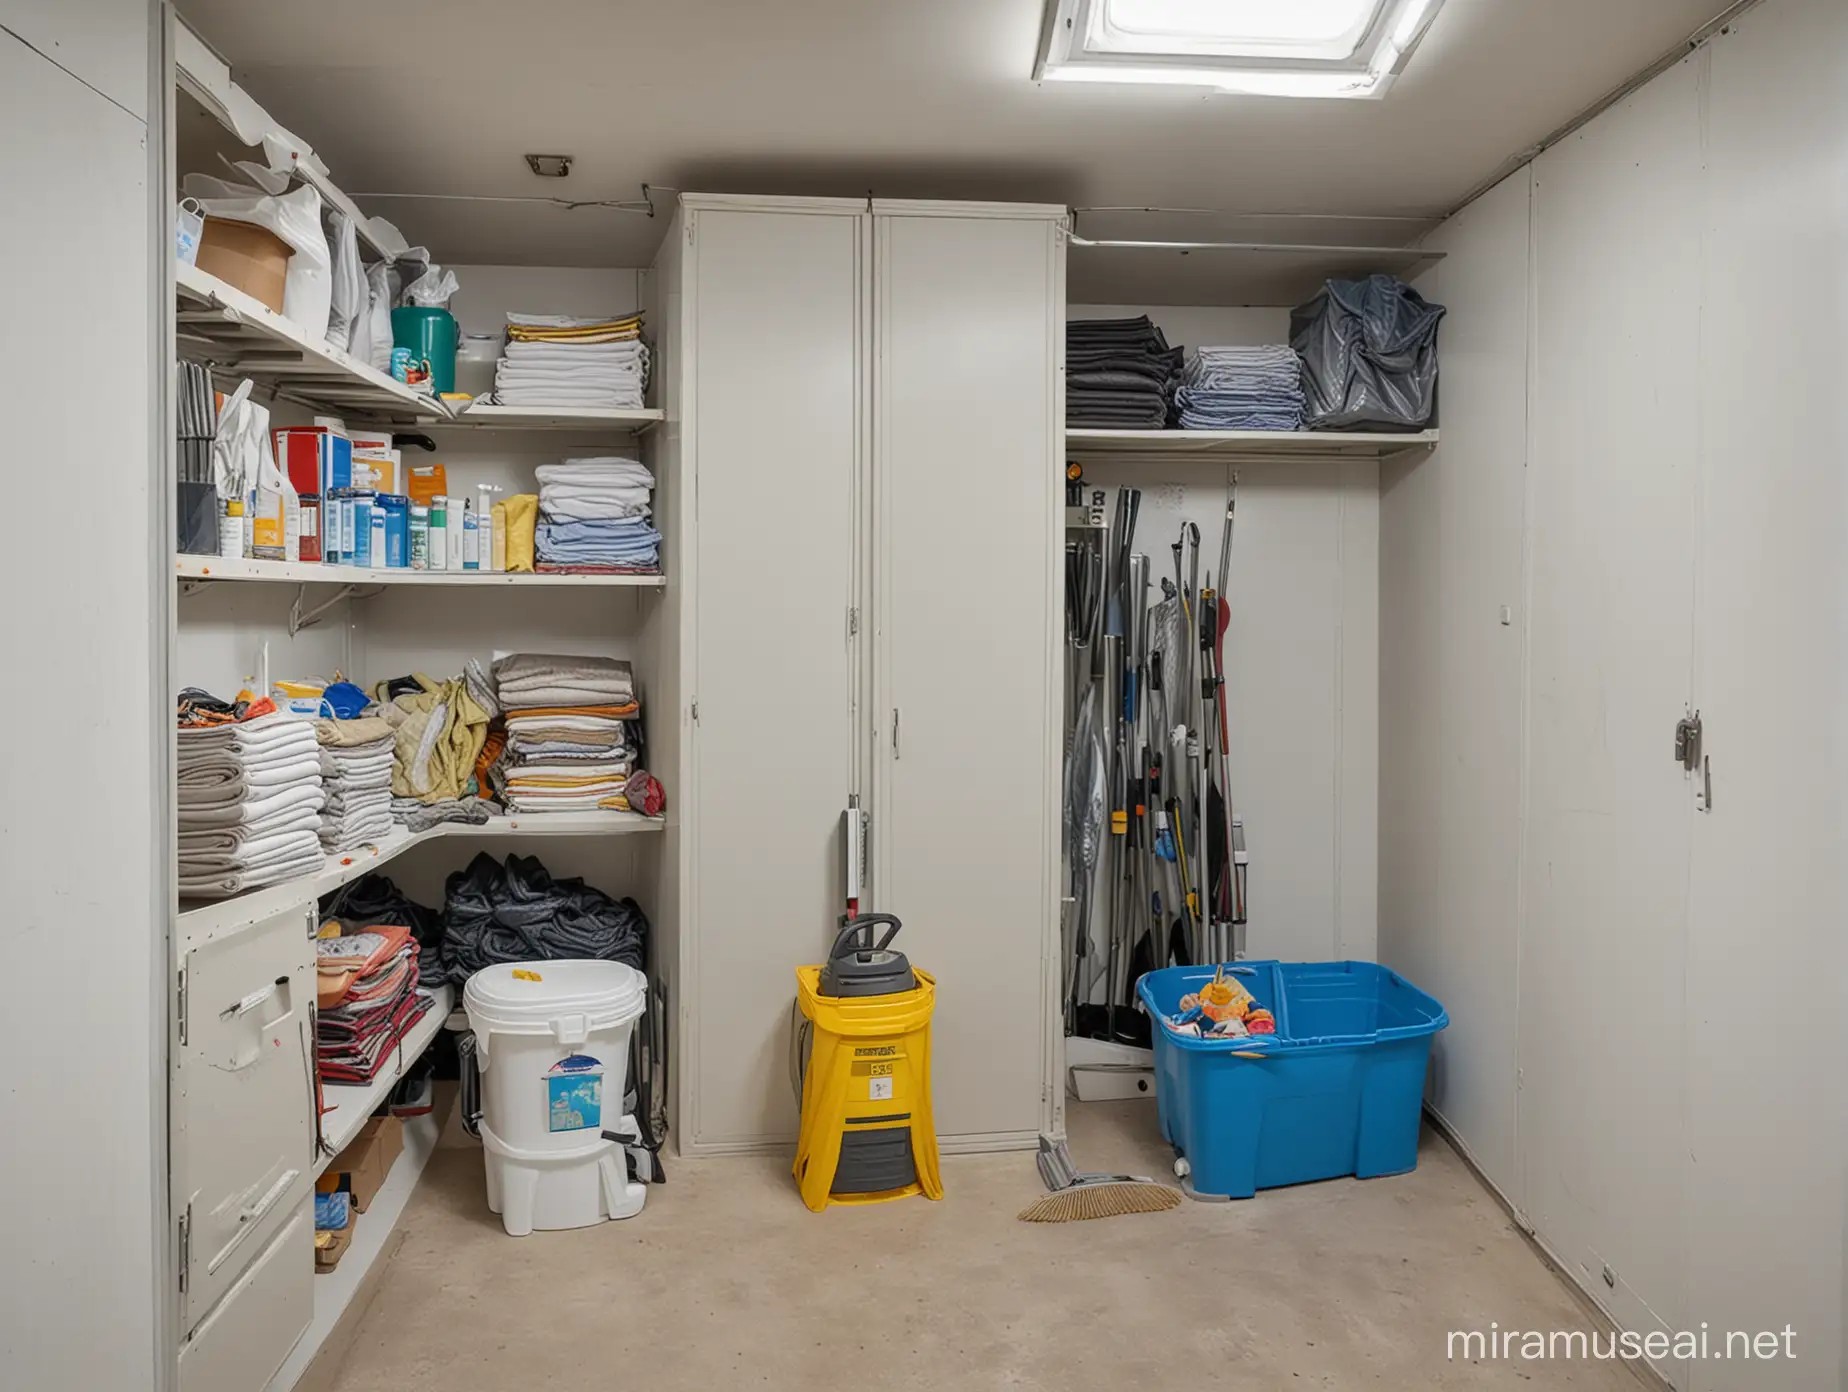 Organized Bunker Storage Room with Assorted Household Items